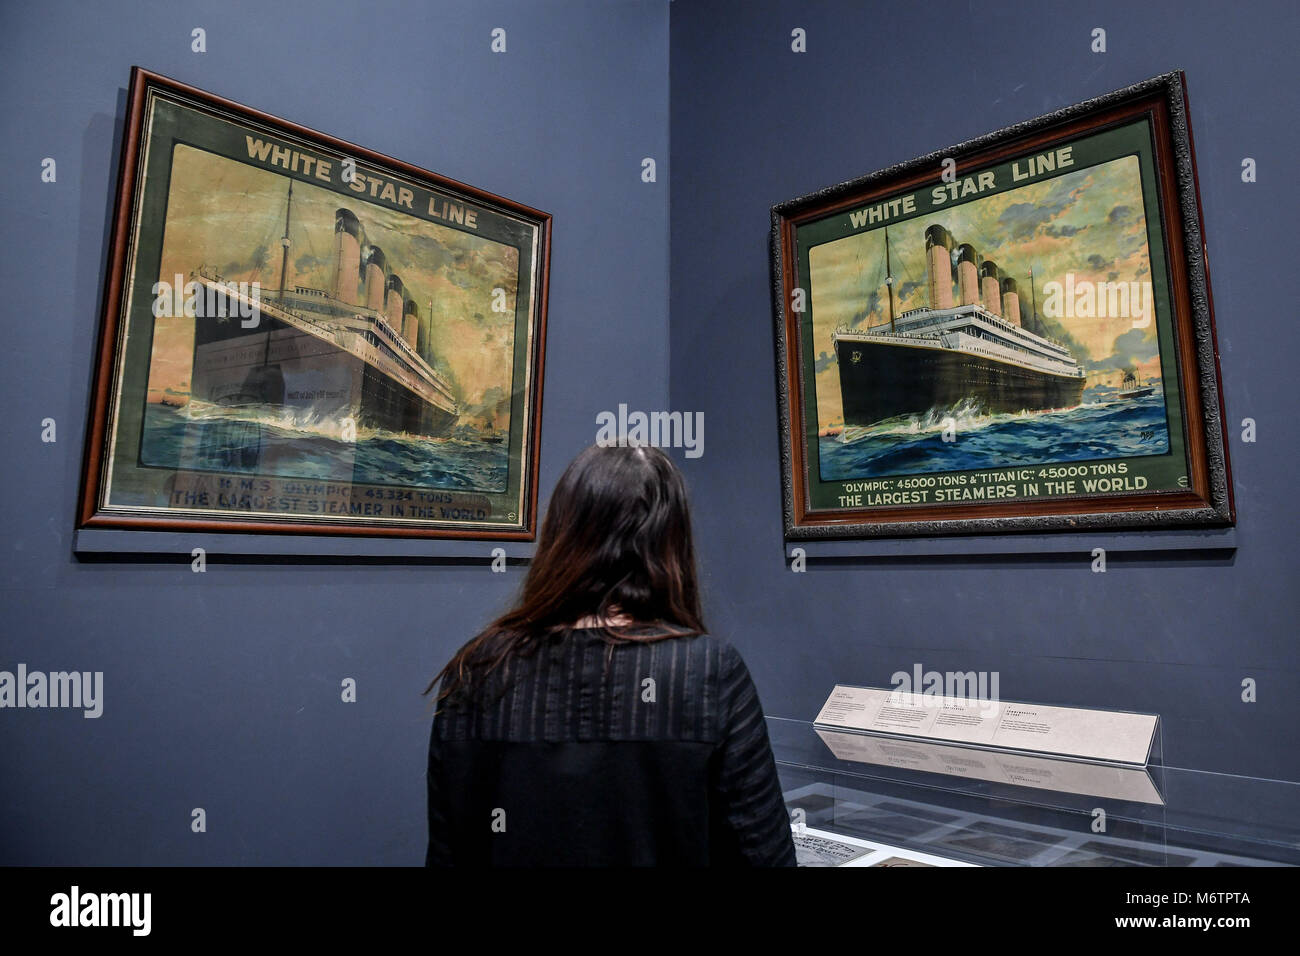 A woman looks at two publicity posters from the White Star Line company, during a preview of the Titanic Stories exhibition at the National Maritime Museum Cornwall, Falmouth, which opens on March 8. Stock Photo